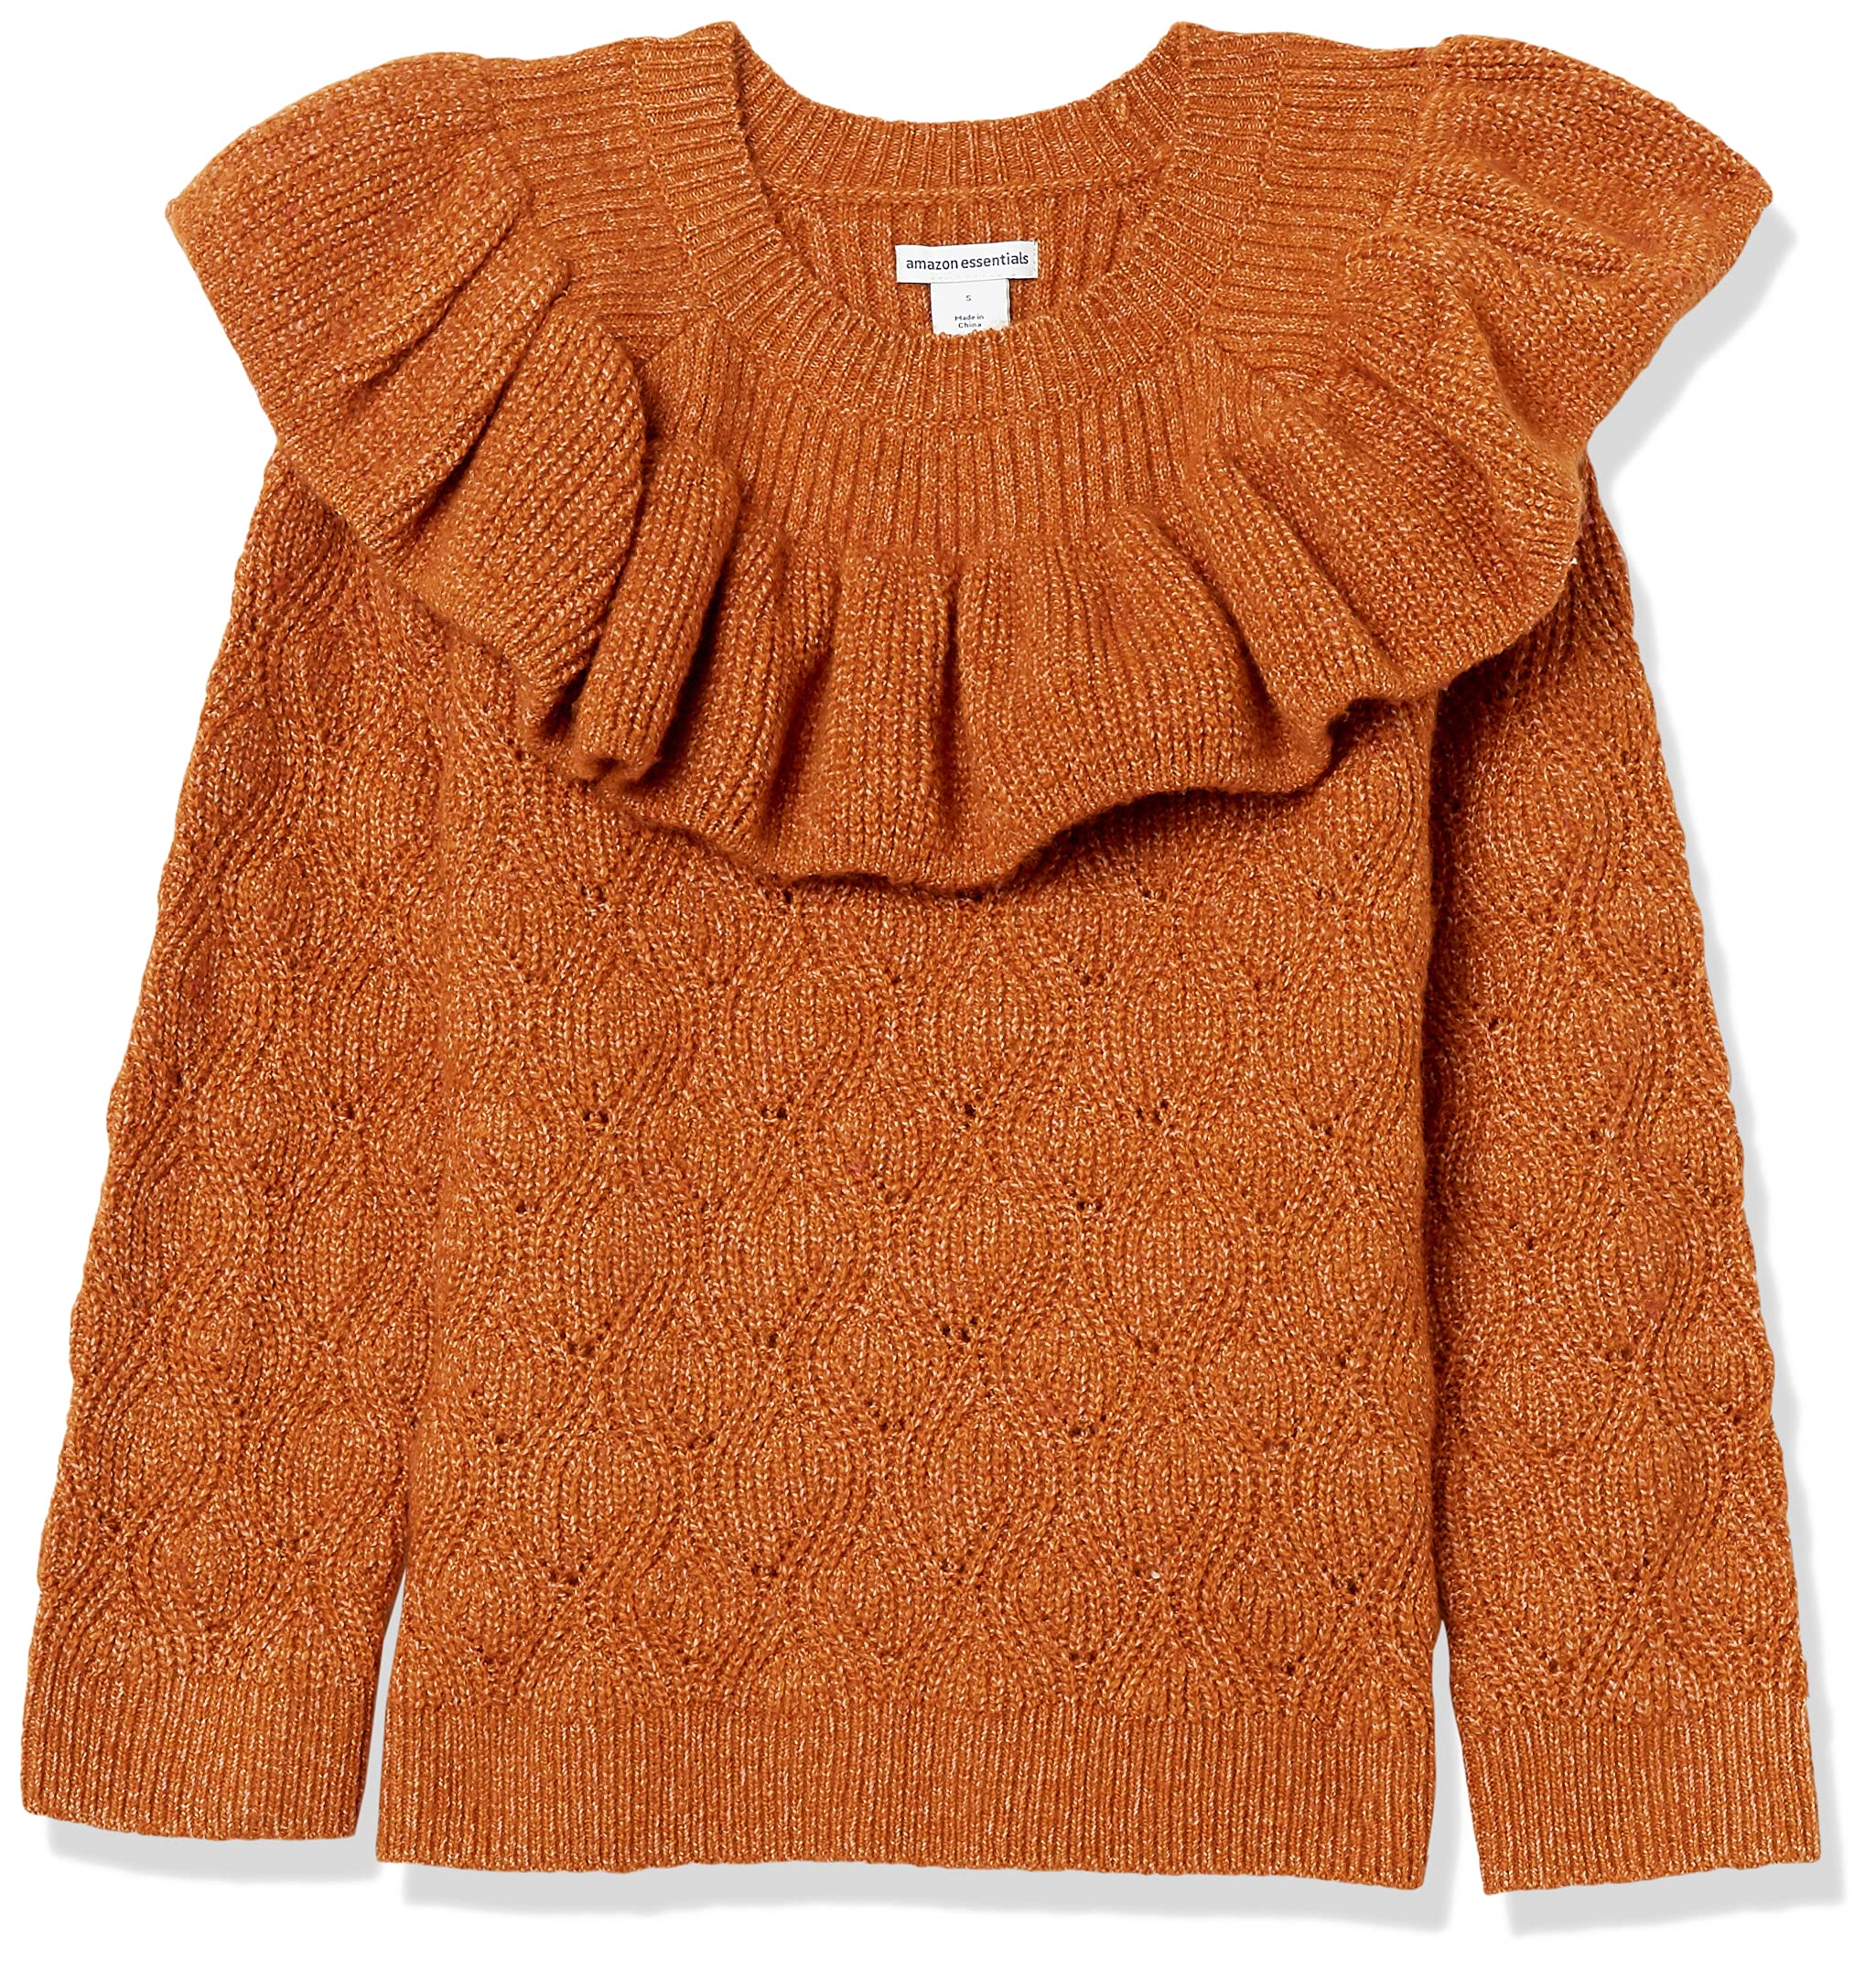 Amazon Essentials Girls and Toddlers' Soft Touch Ruffle Sweater